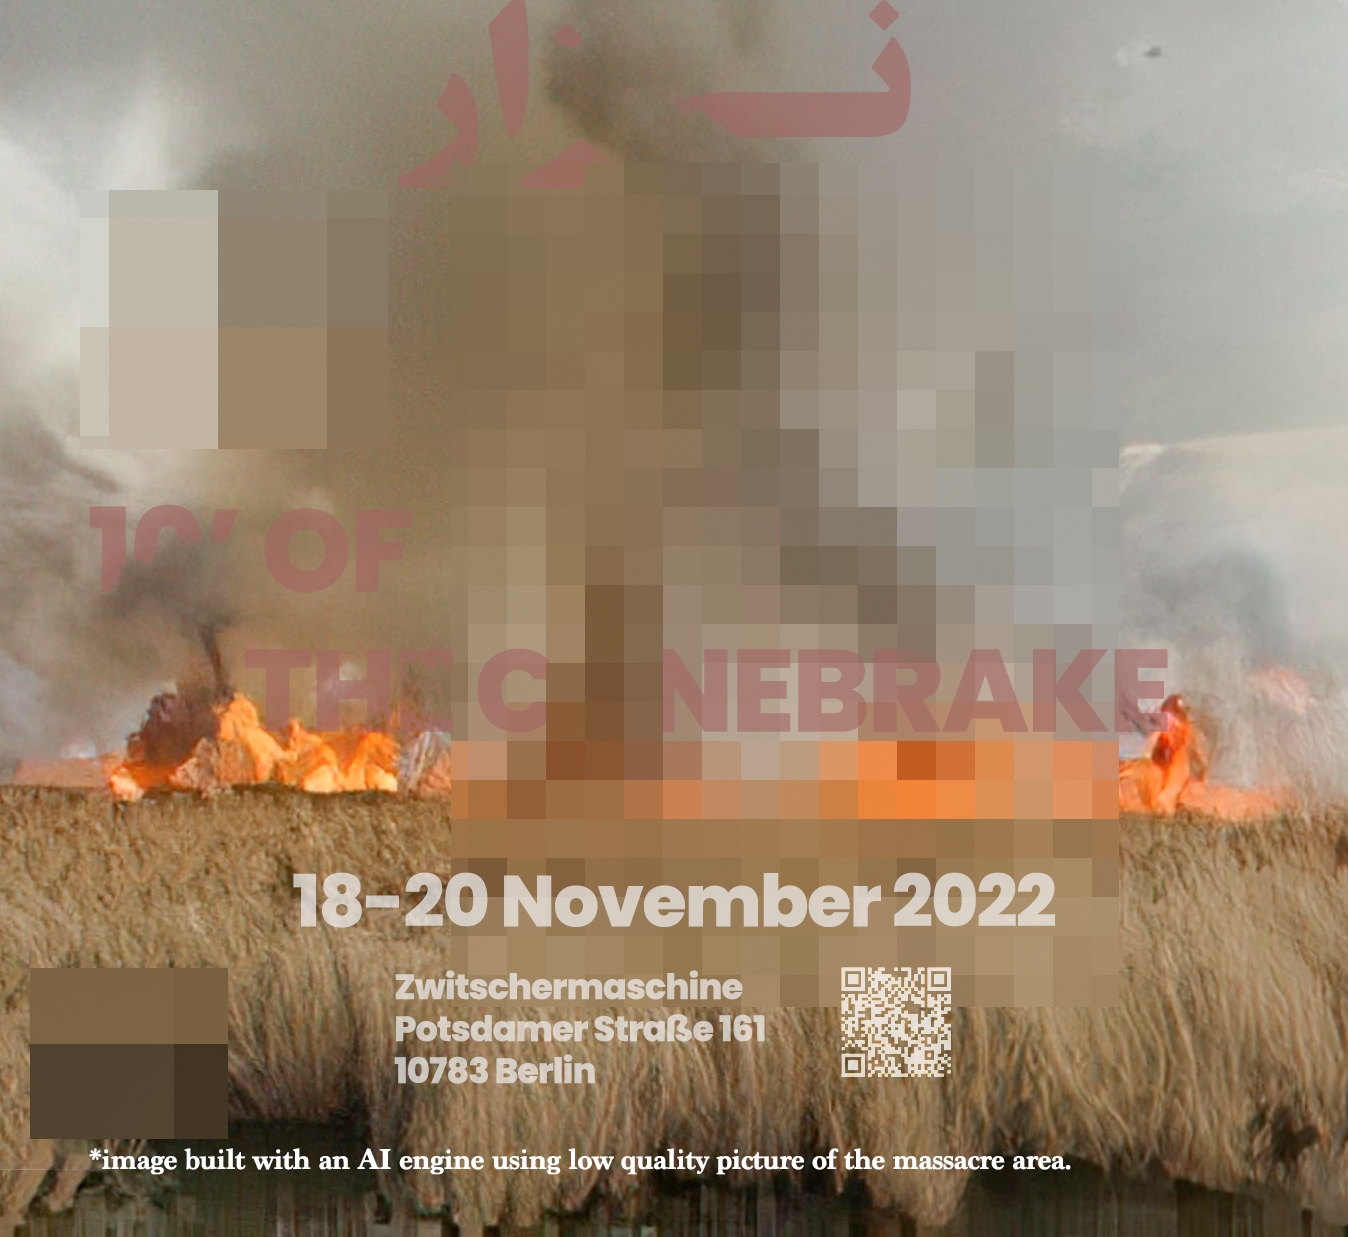 Glitchy image of an explosion in a grass field. Text reads 18-20 November Zwitschermaschne. !0' of the Cananbrake."